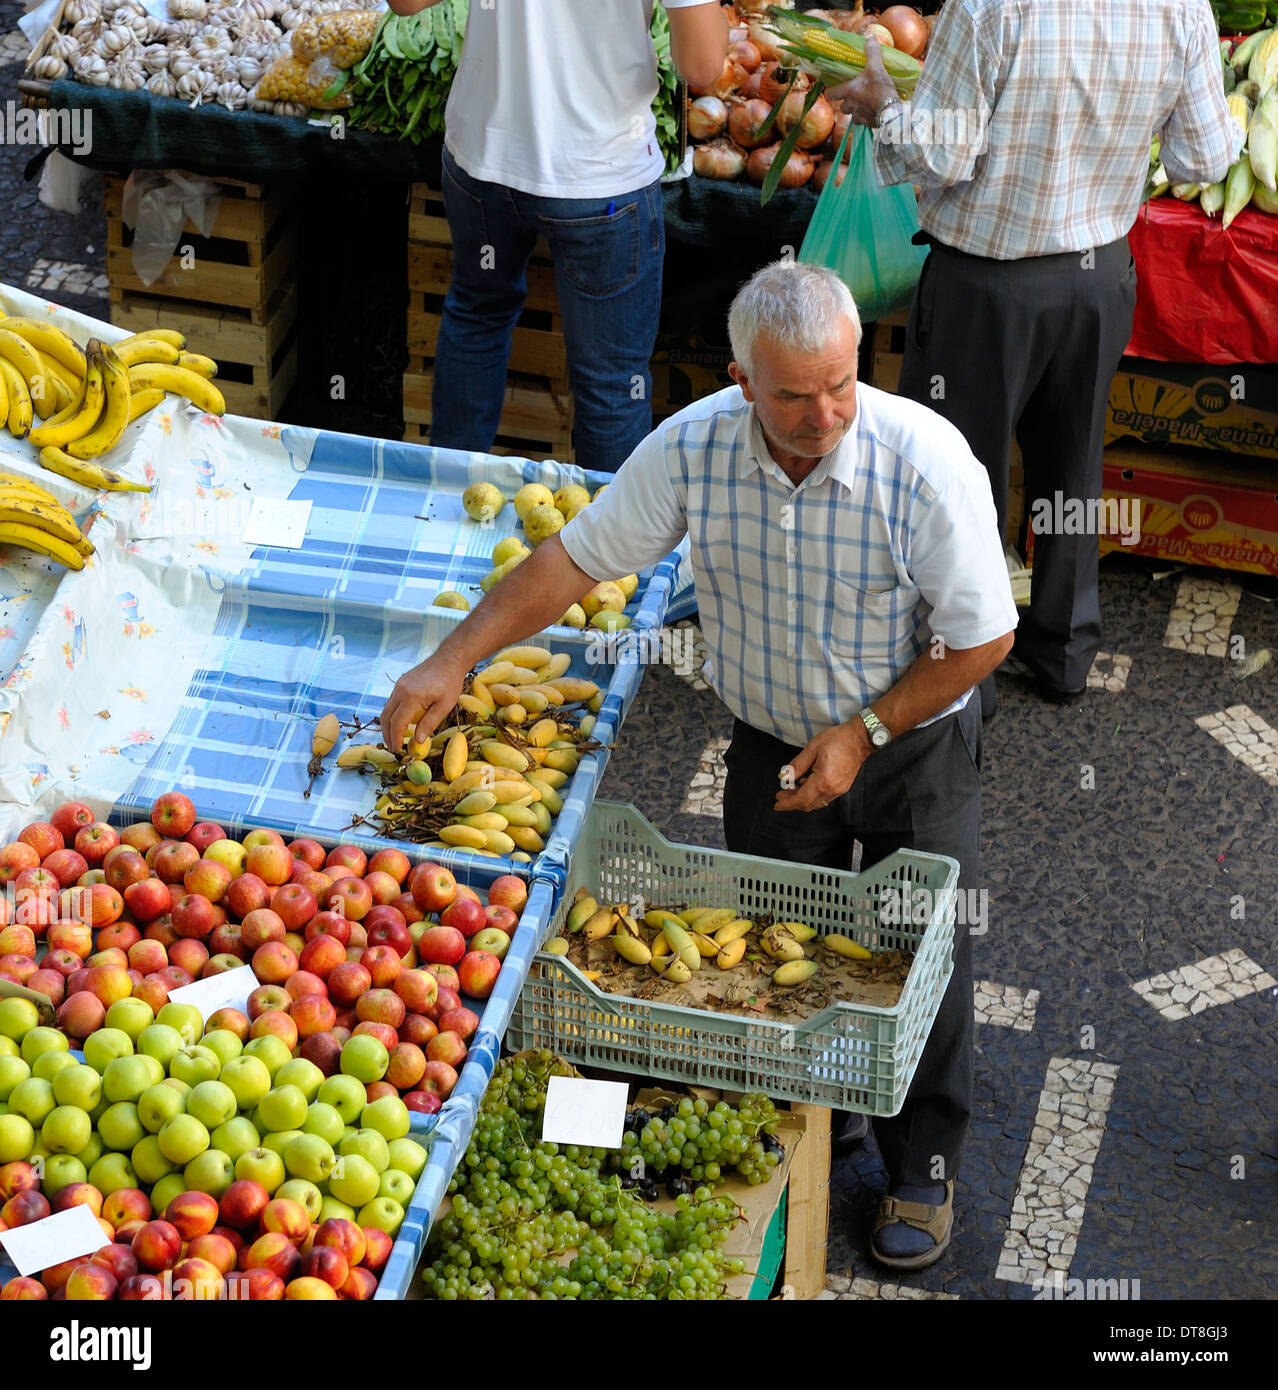 Funchal Madeira The indoor fruit and vegetable market Mercado dos Lavradores A market trader tidying his stall Stock Photo